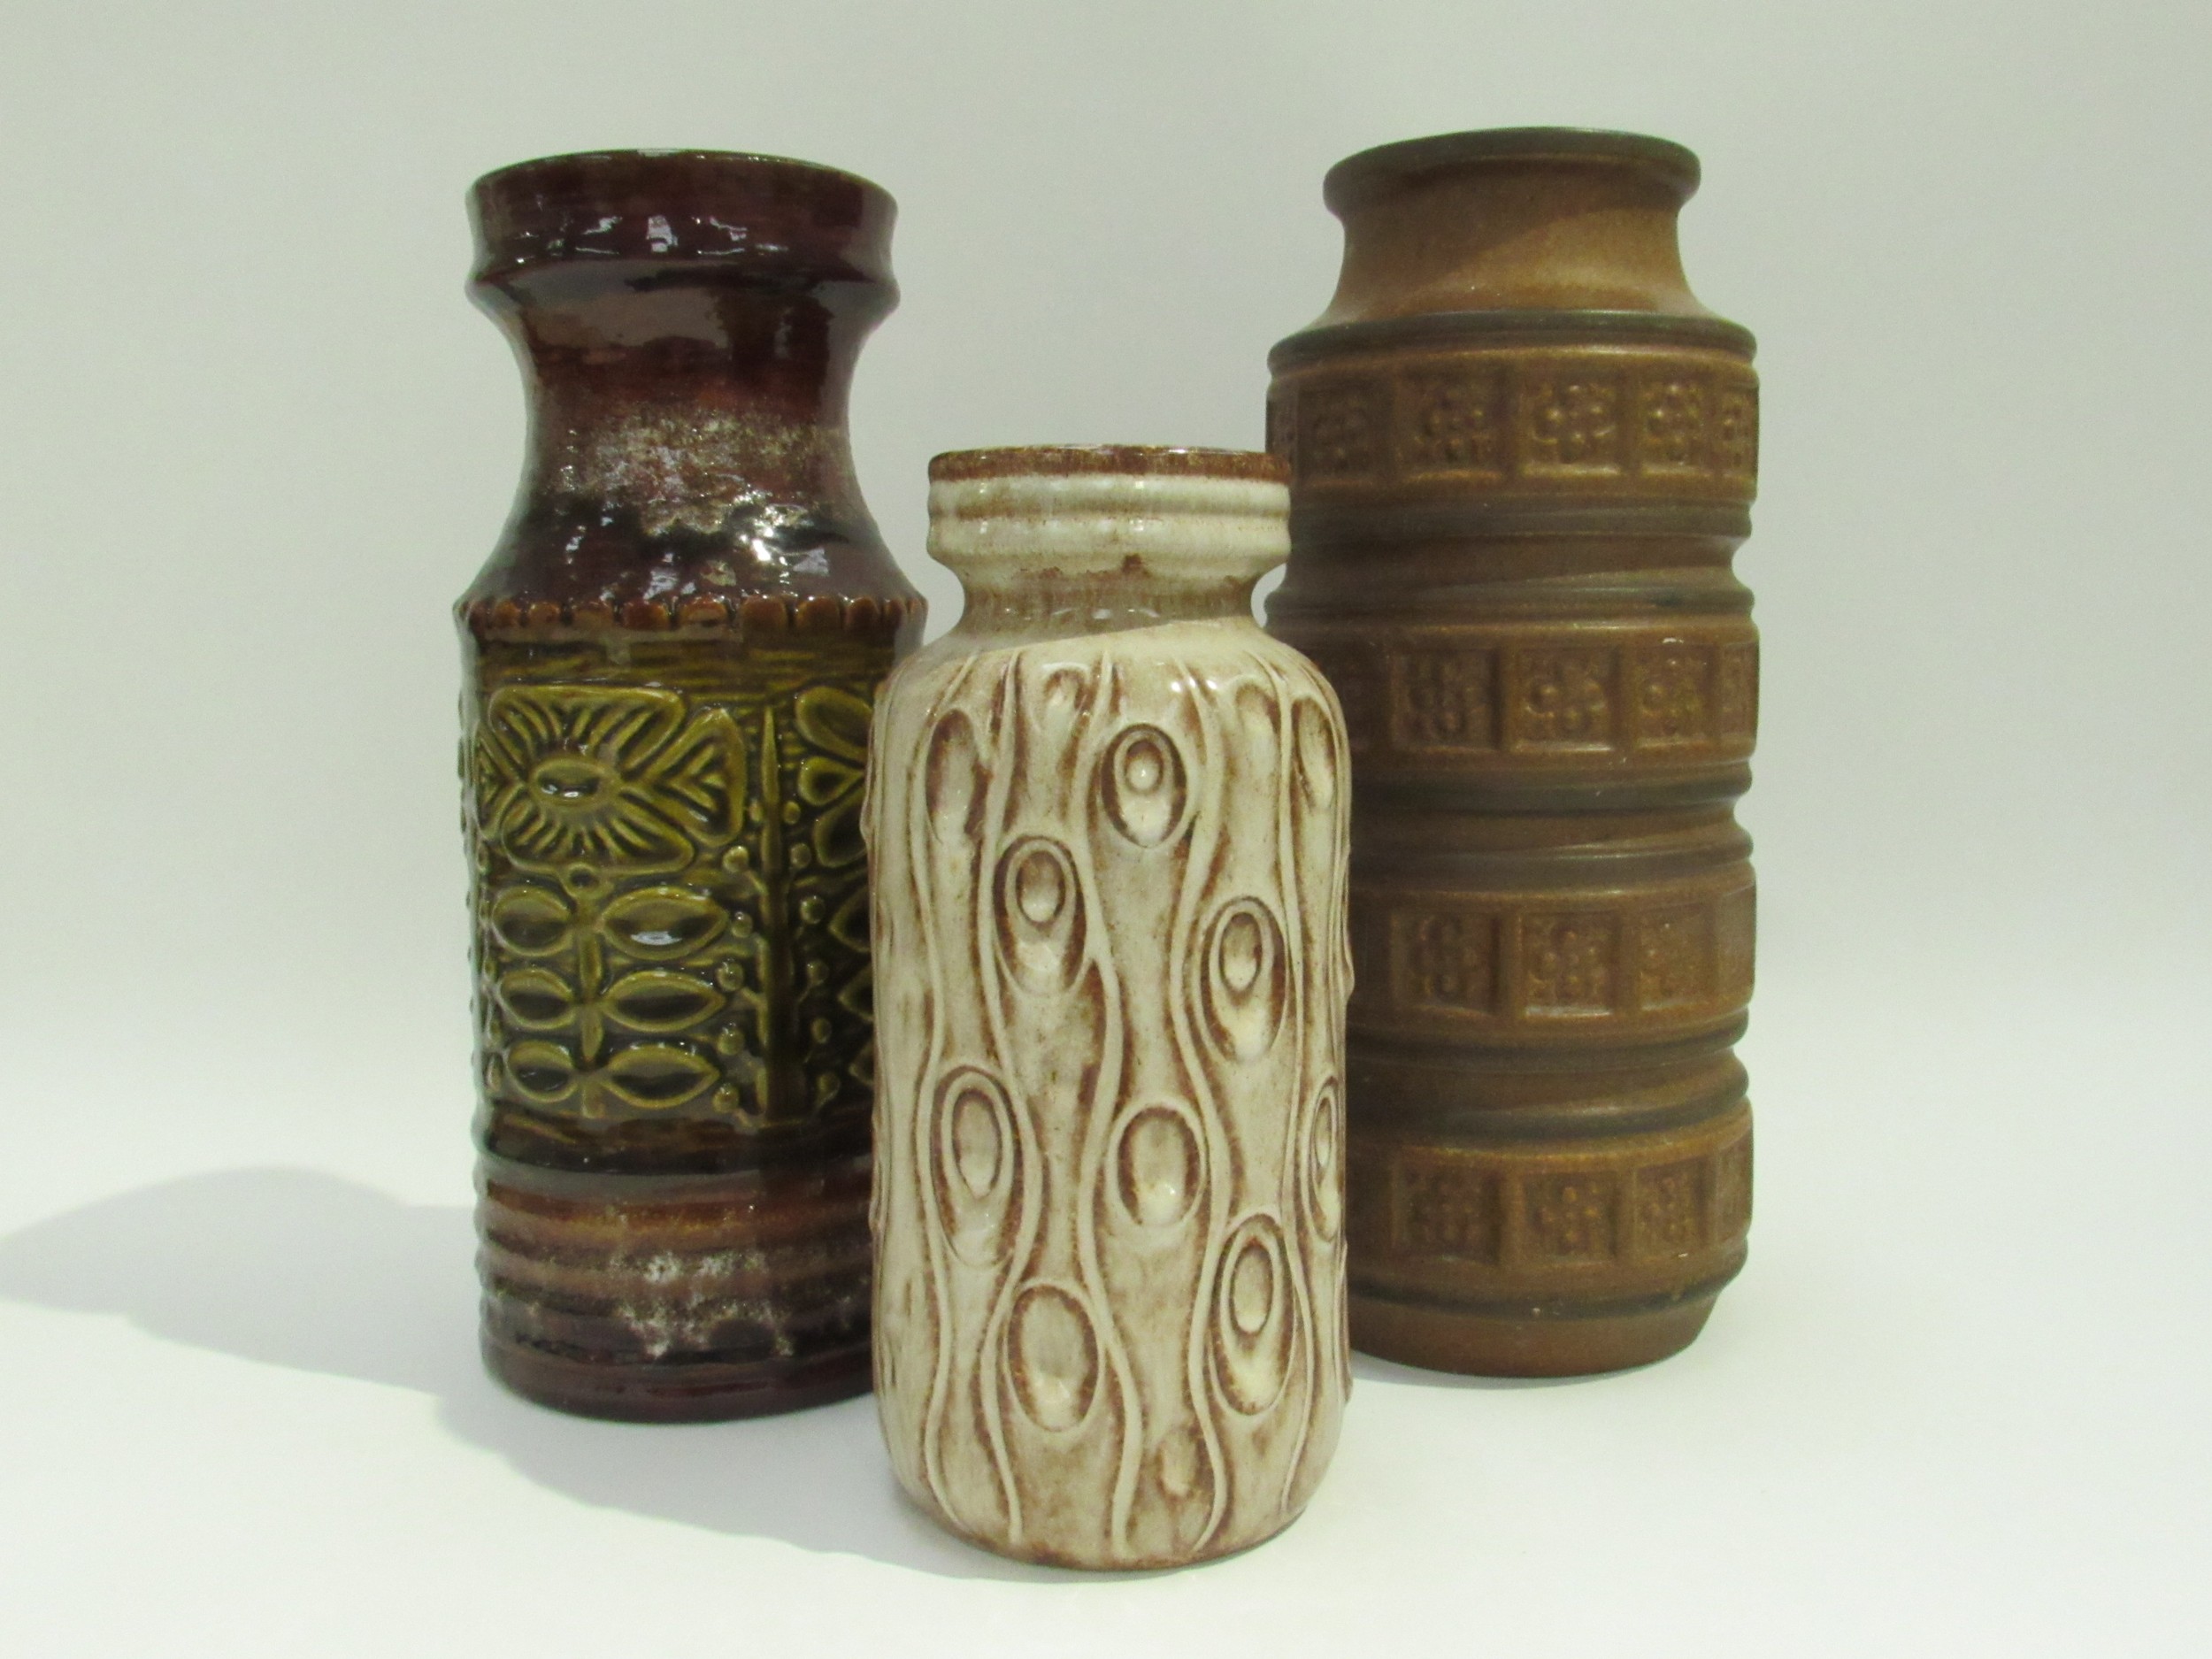 Three West German Pottery vases with treacle, cream and tan colour glazes. No.558/30, 288-22 and